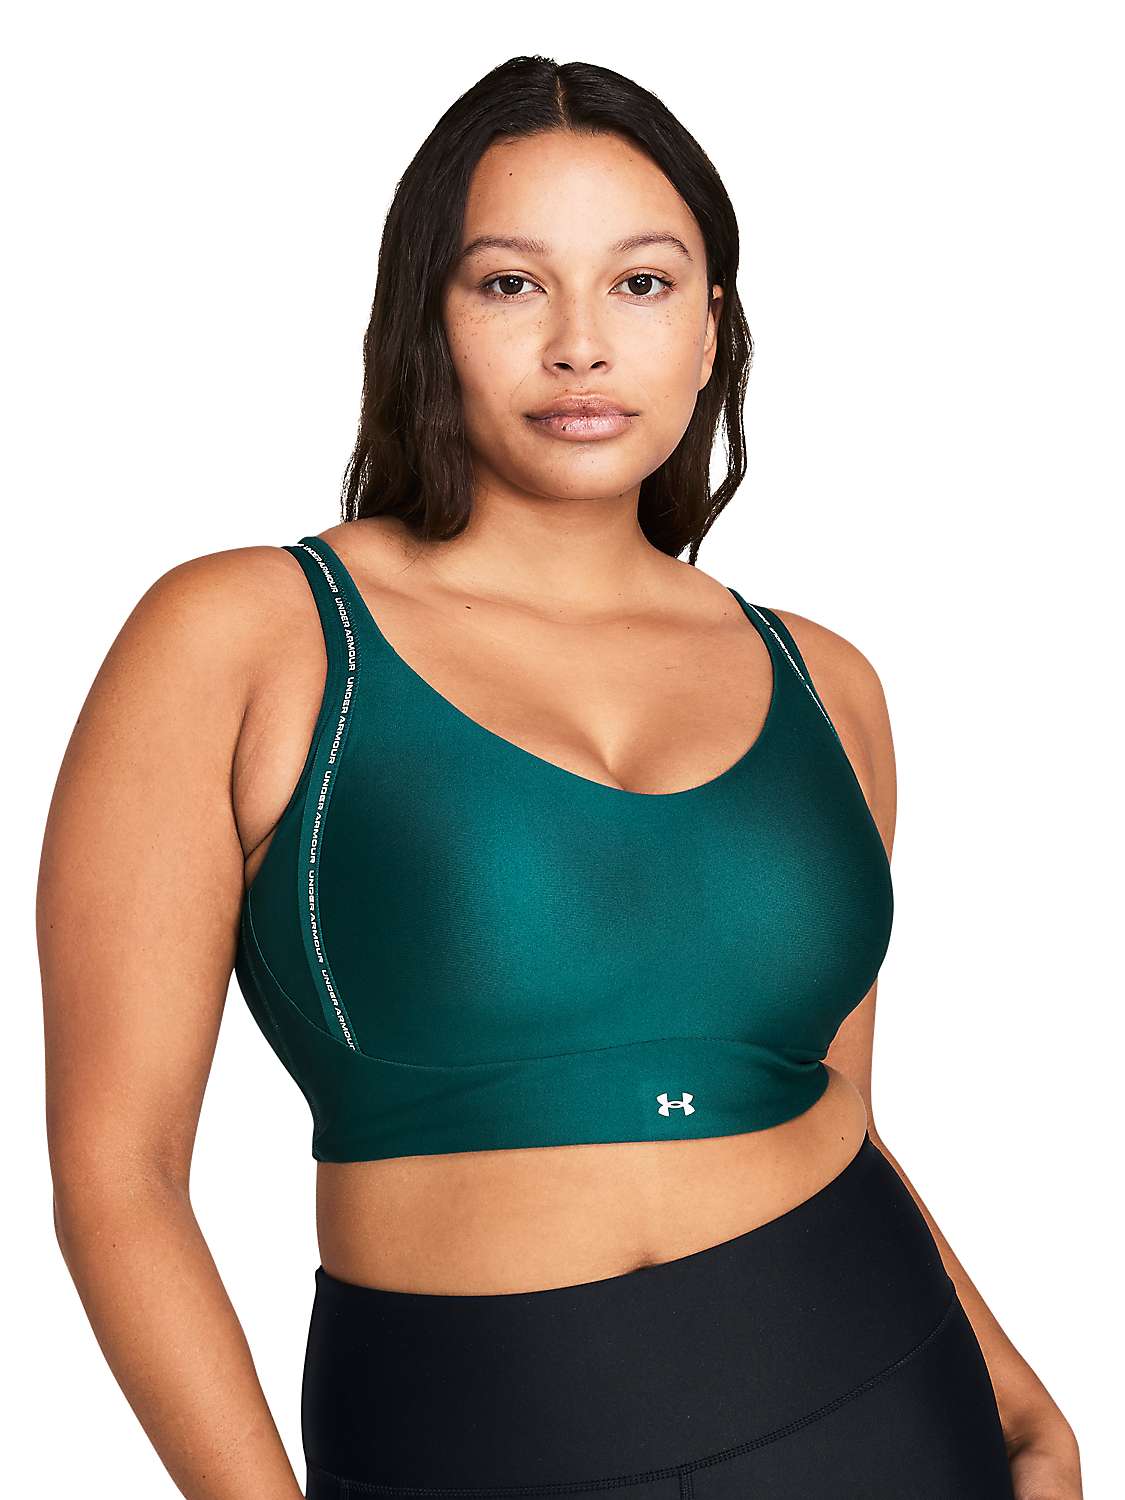 Buy Under Armour Infinity 2.0 Low Strappy Sports Bra, Hydro Teal/White Online at johnlewis.com